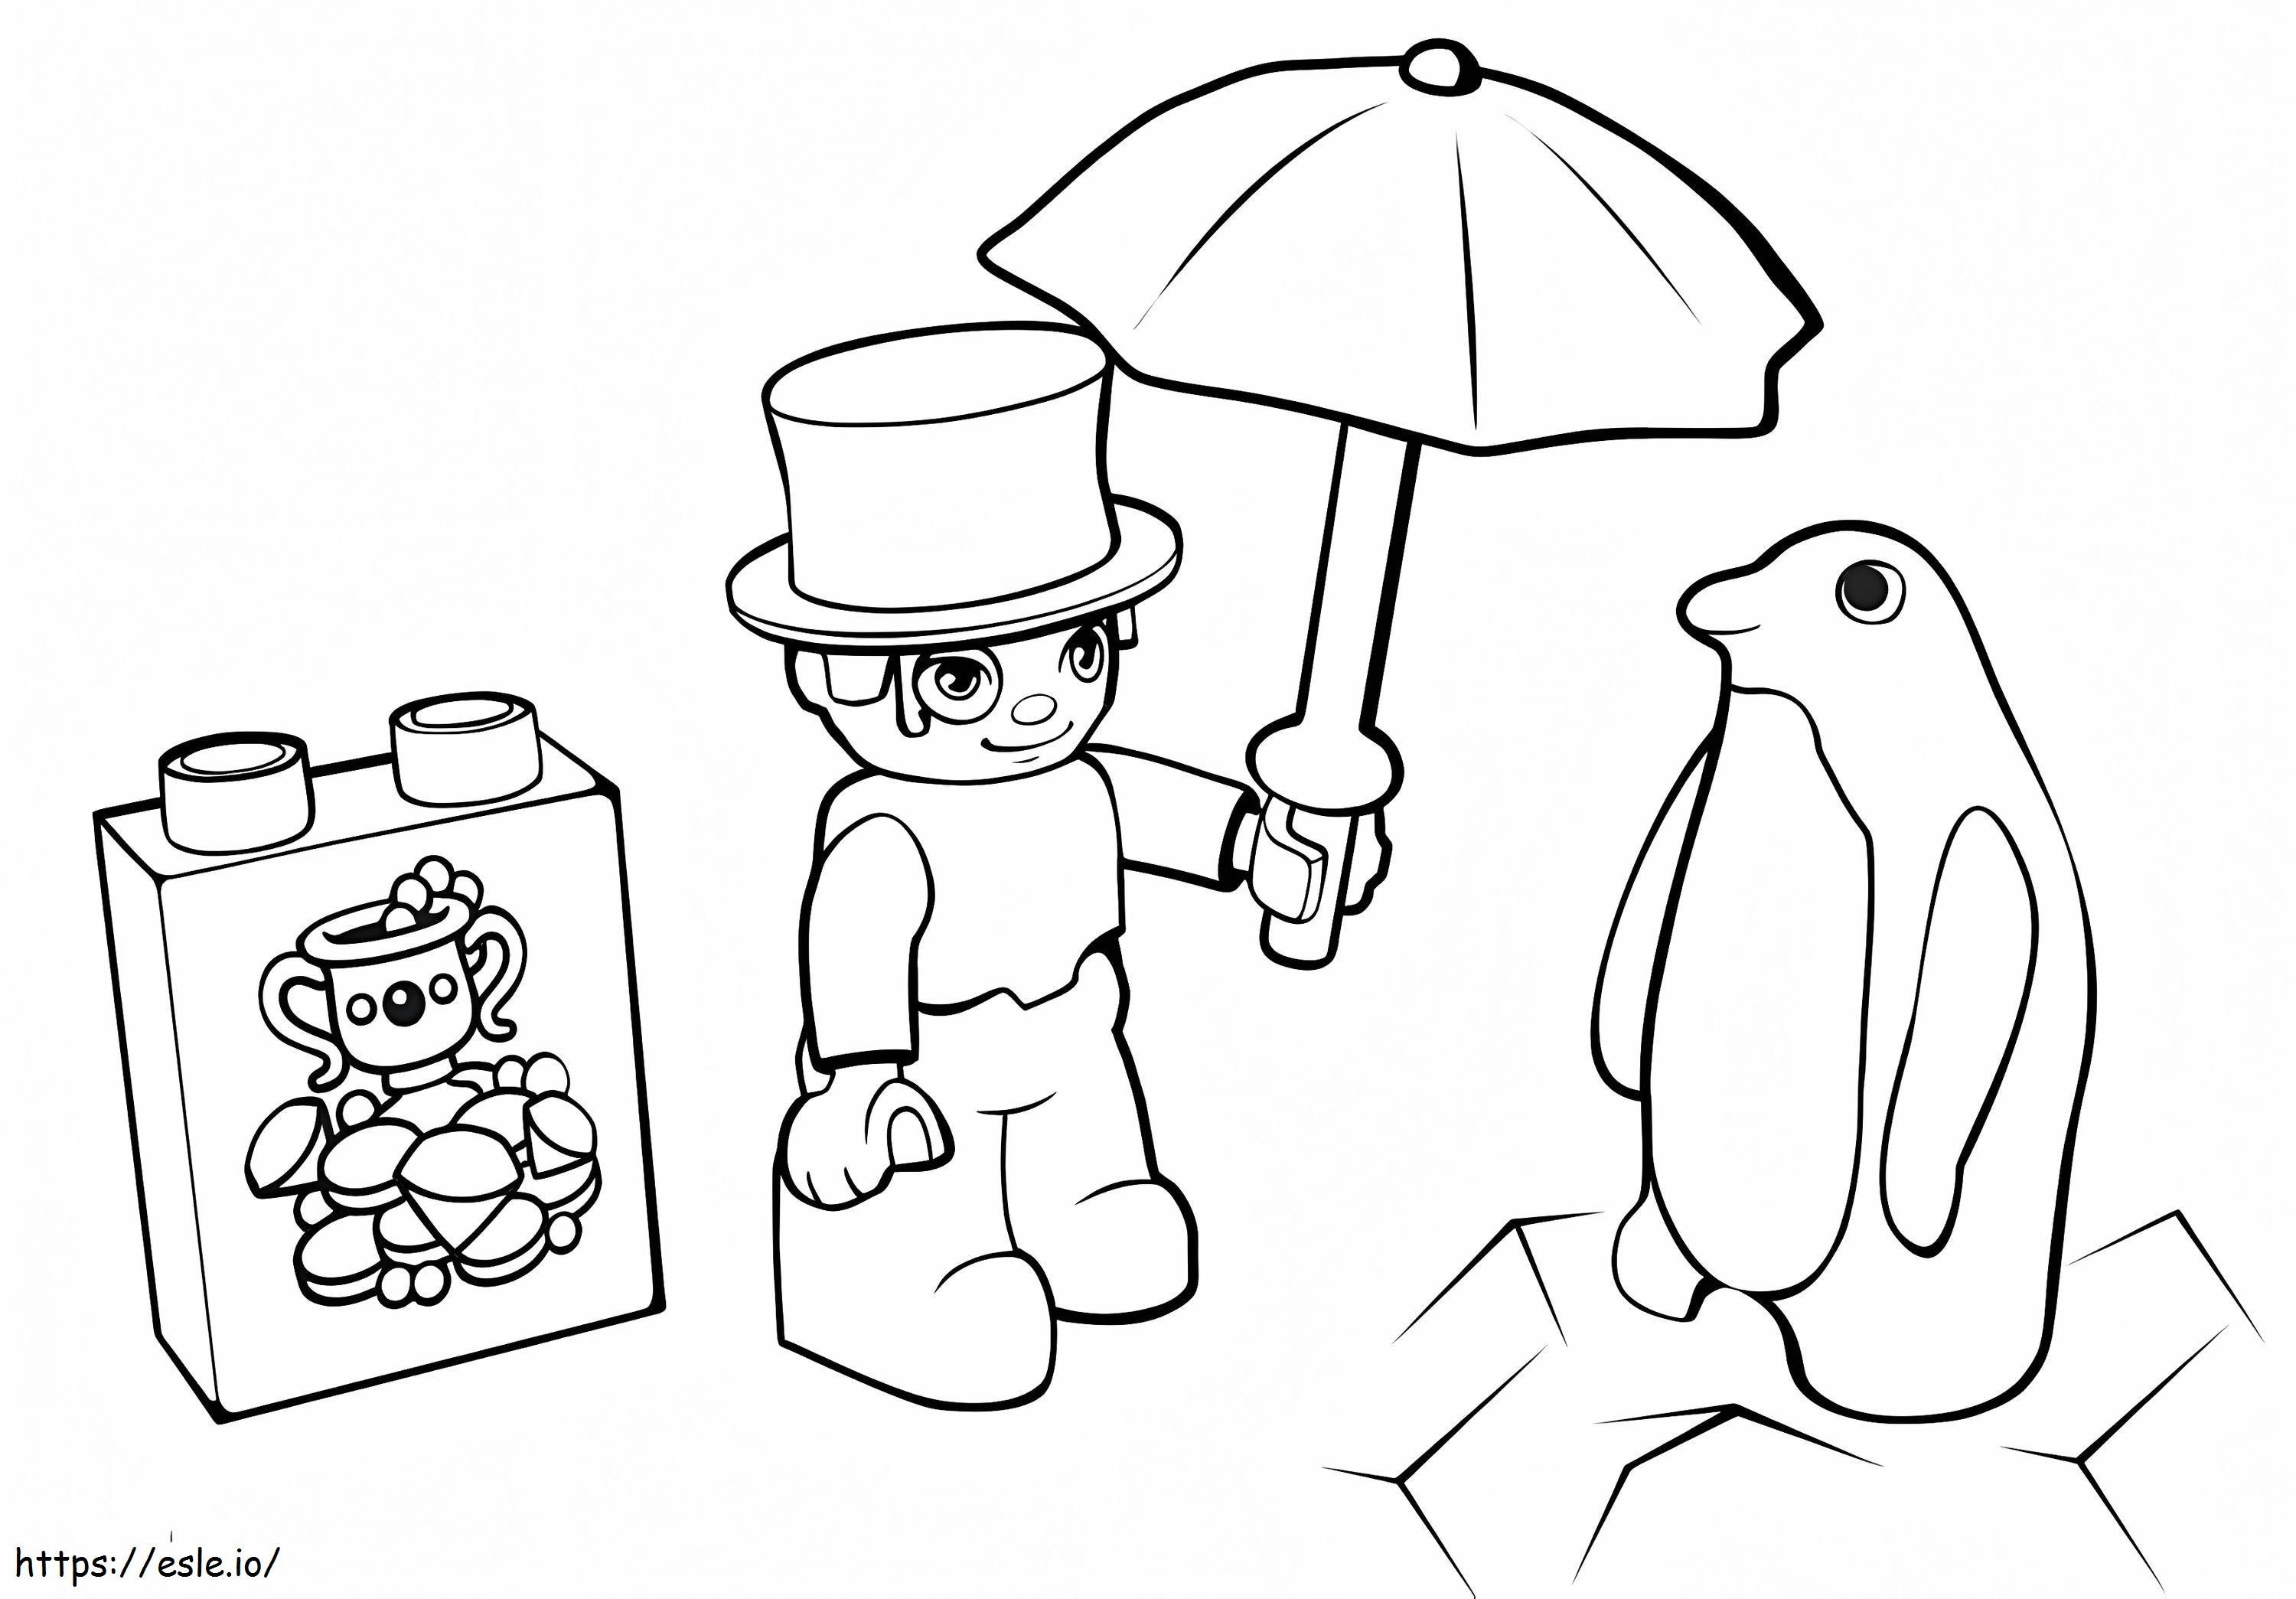 The Penguin Lego Duplo coloring page